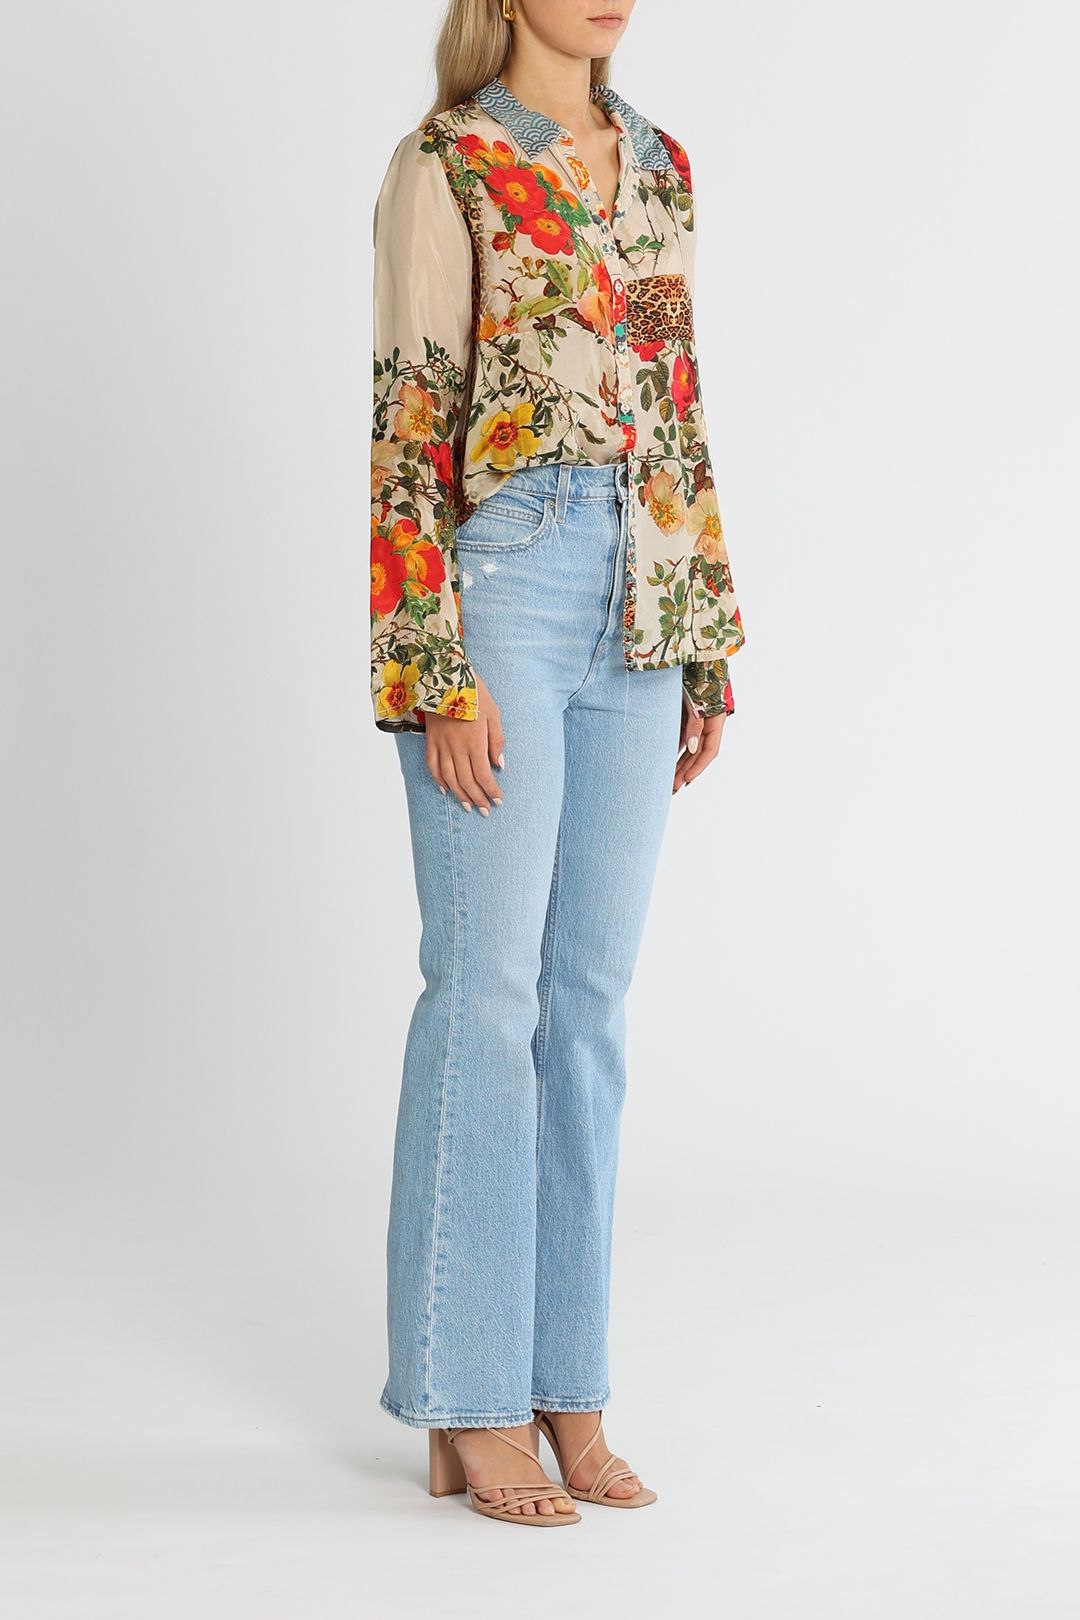 Johnny Was Colette Blouse Multi Long Sleeves